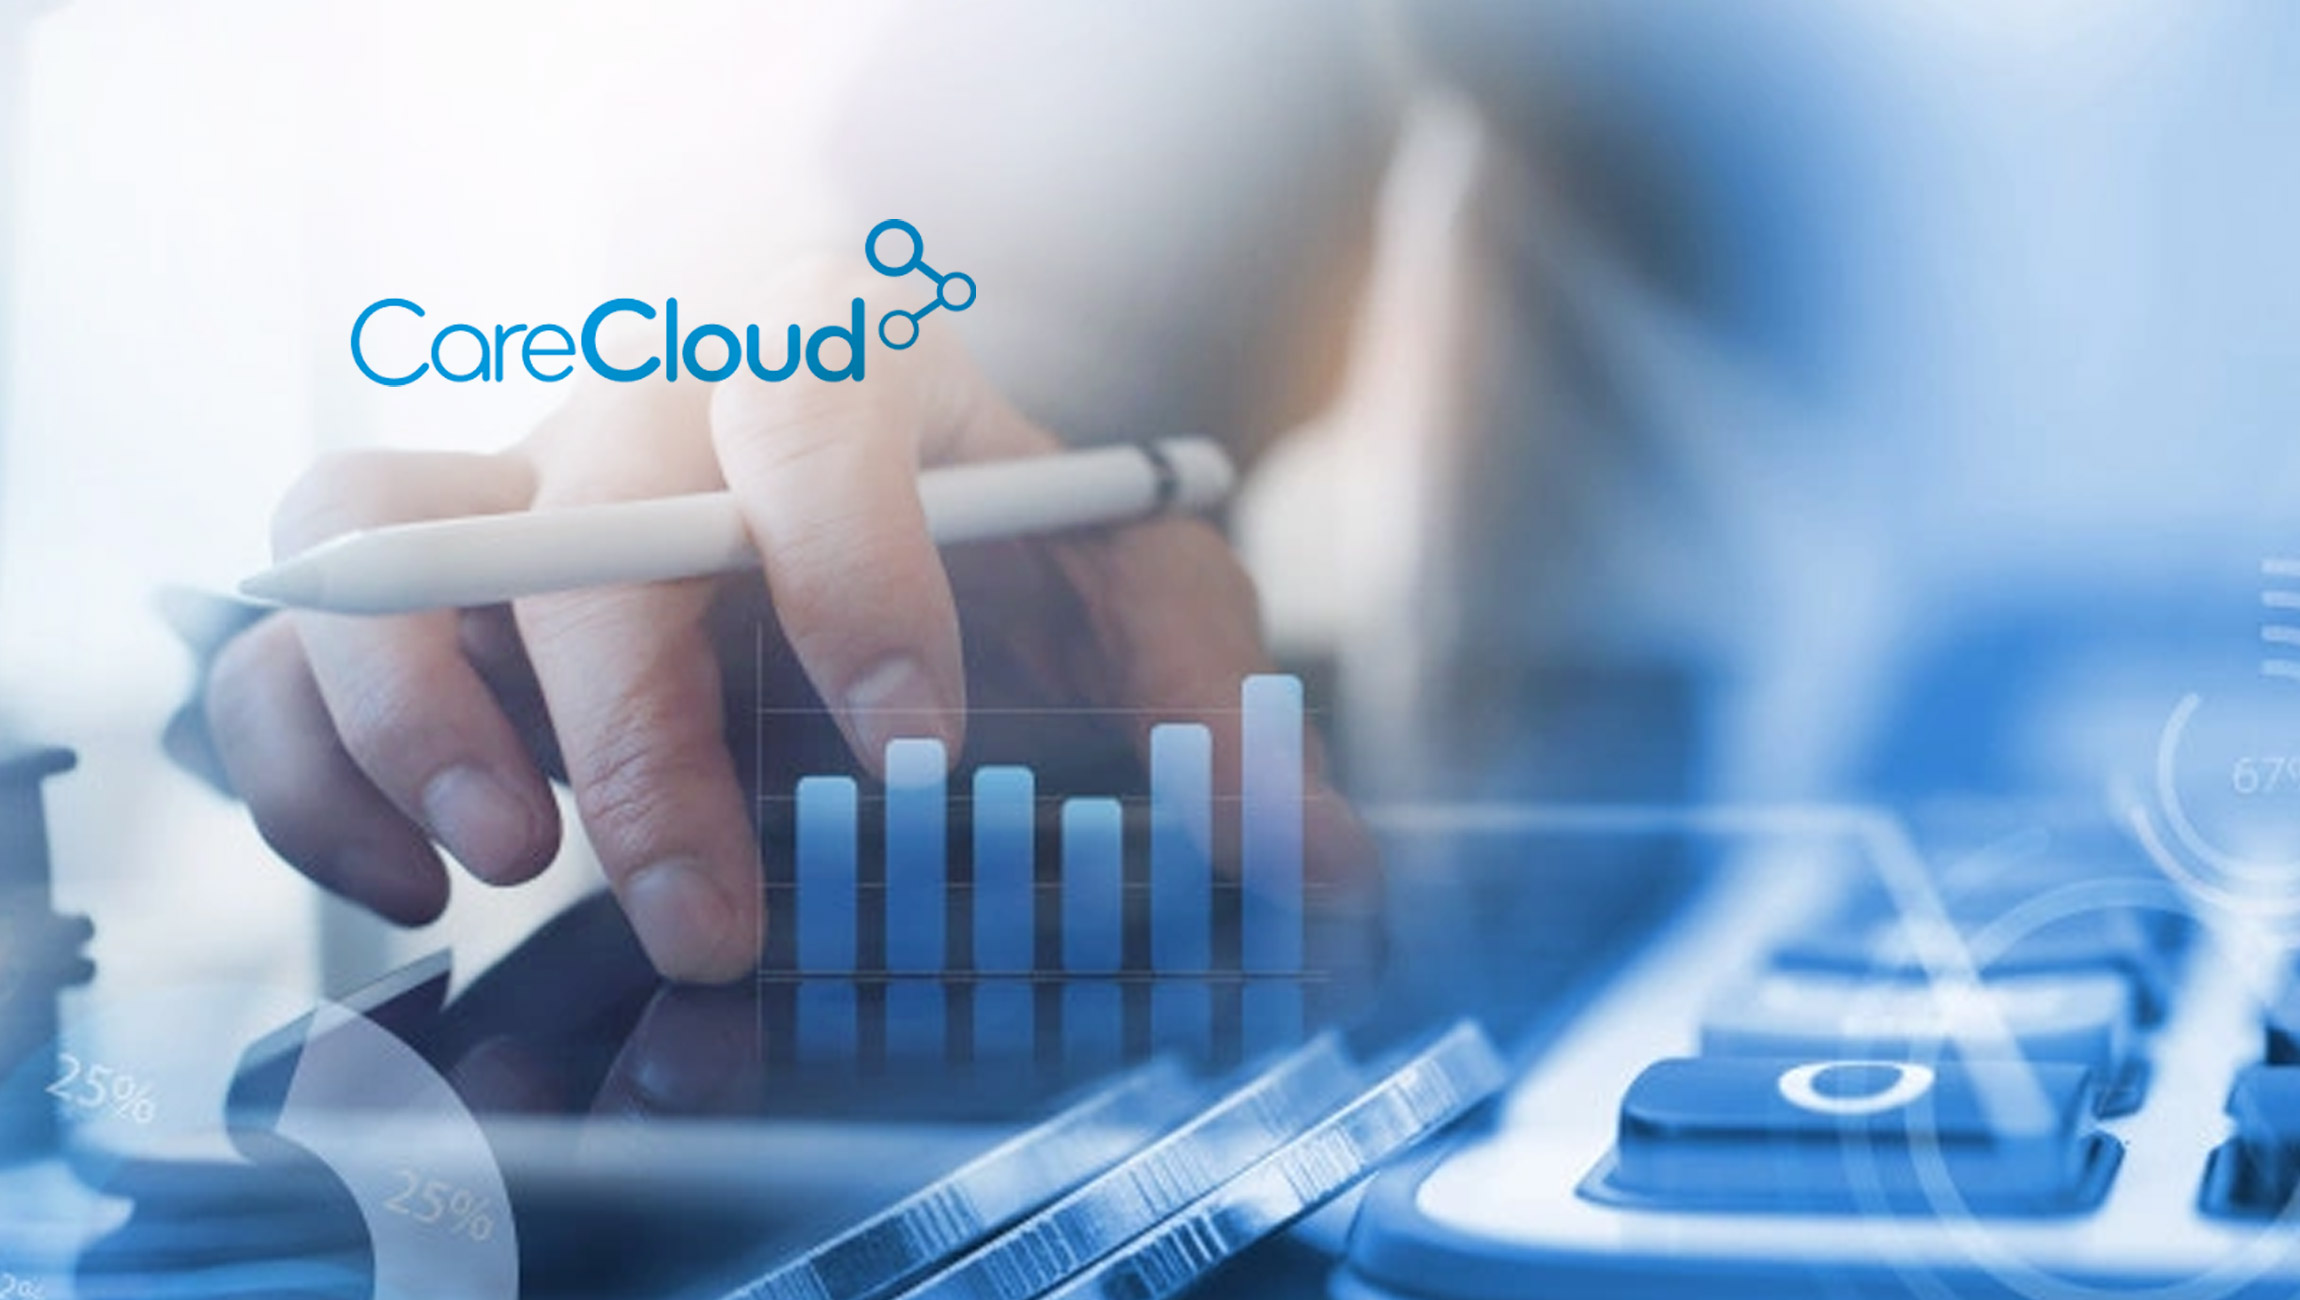 CareCloud’s-Business-Intelligence-Platform-Key-in-Assisting-Providers-Identify-Revenue-Generating-Opportunities